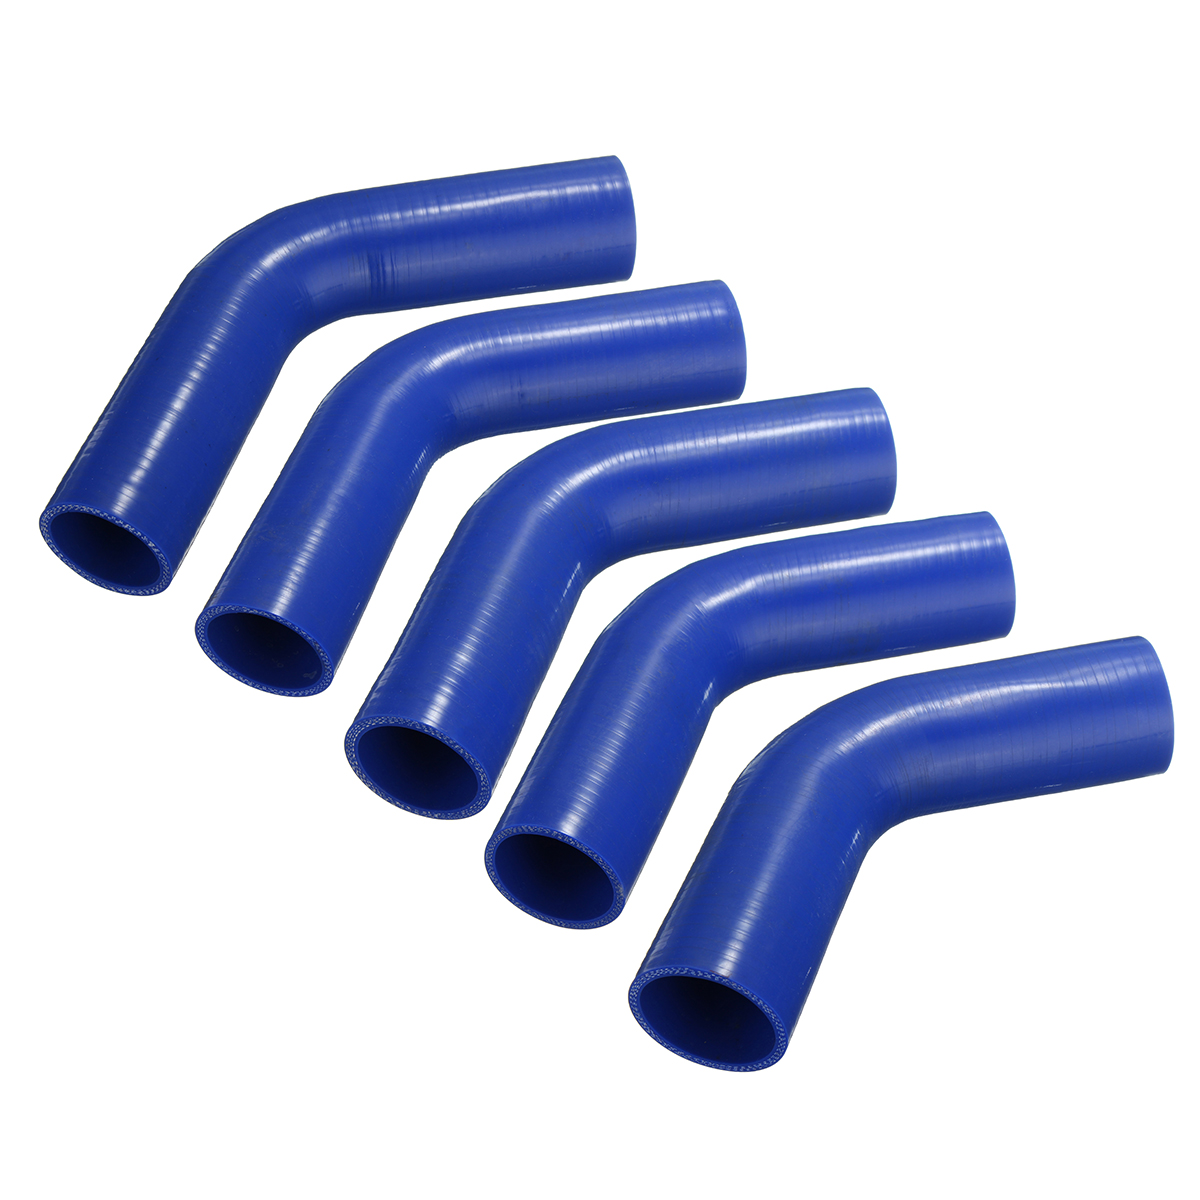 

Auto Silicone Hose Rubber 60 Degree Elbow Bend Hose Air Water Coolant Joiner Pipe Tube